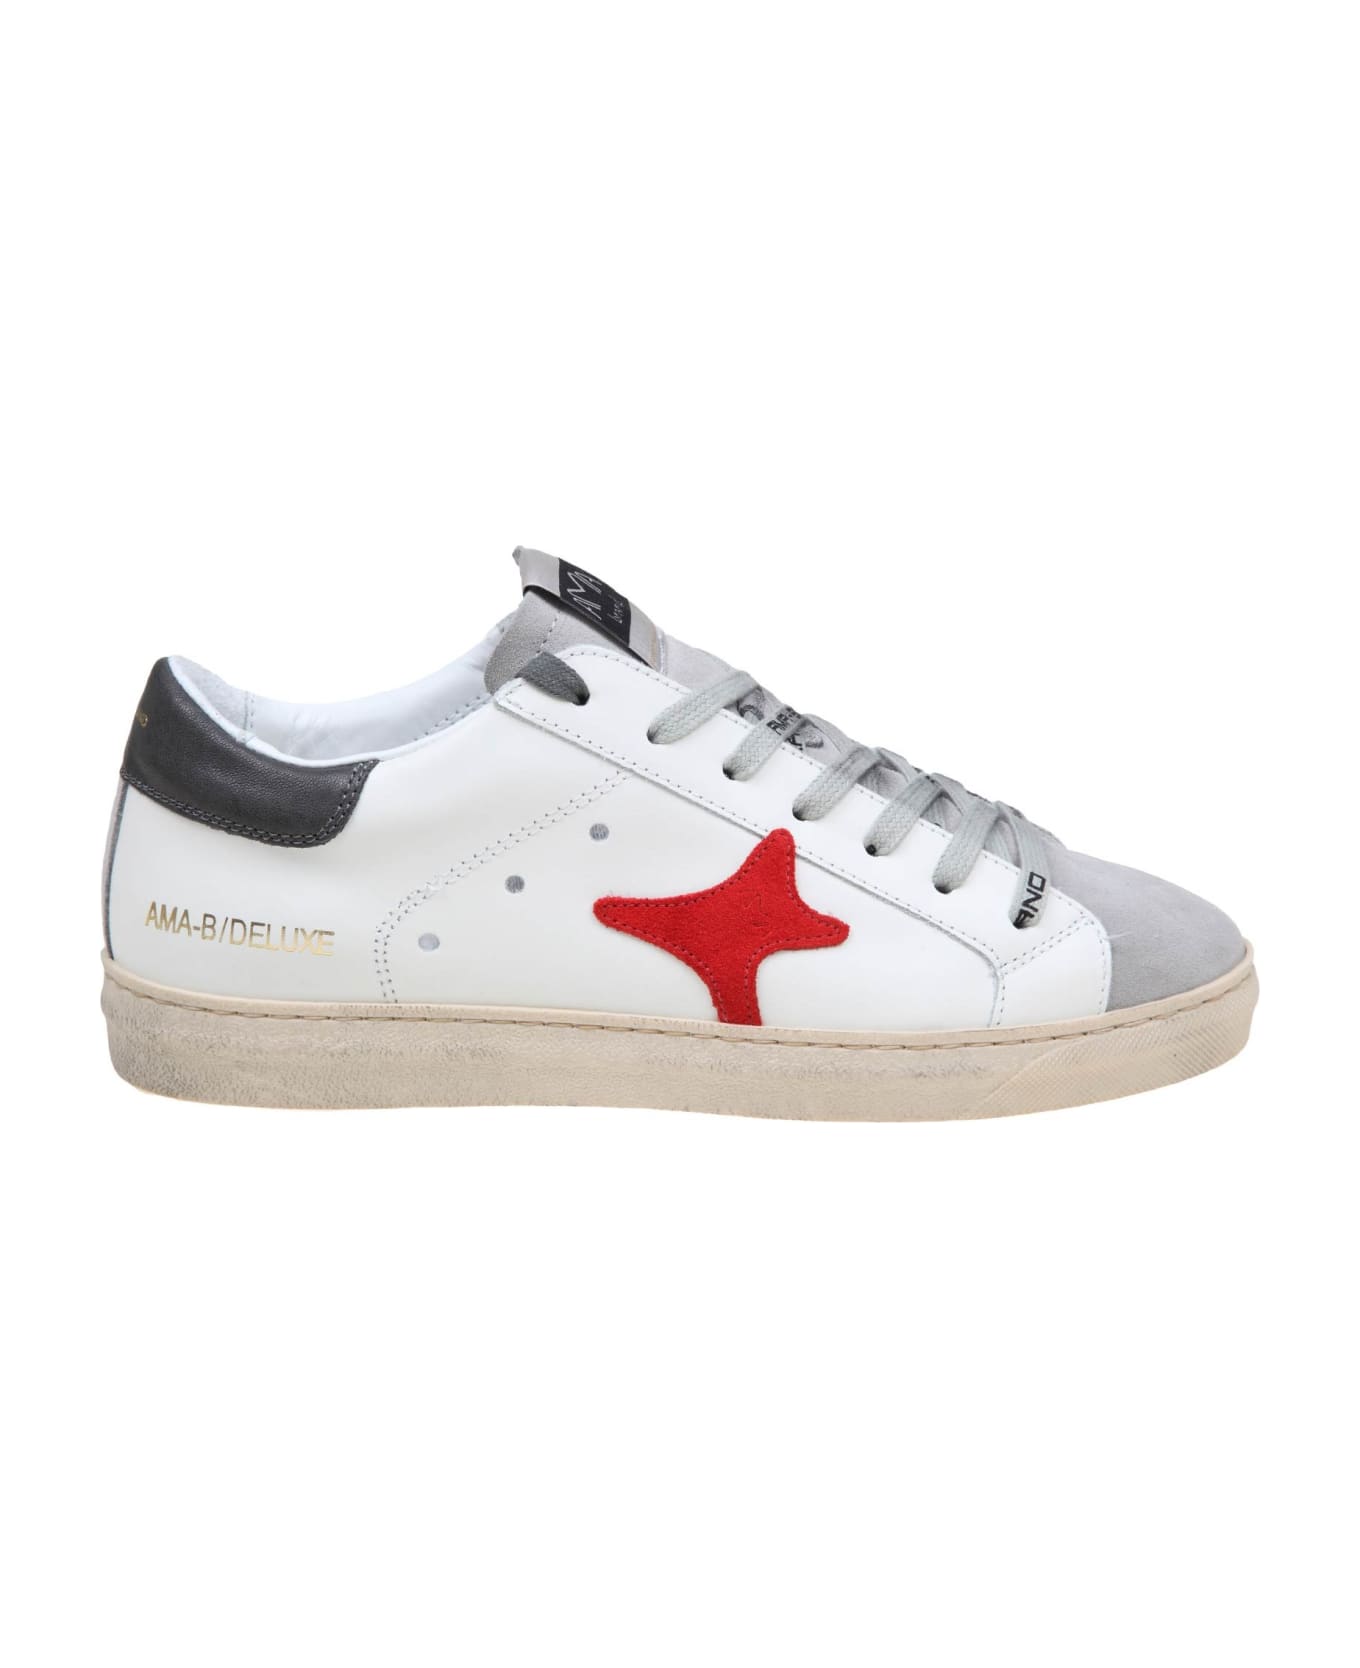 AMA-BRAND White And Red Leather Sneakers - White/Grey スニーカー